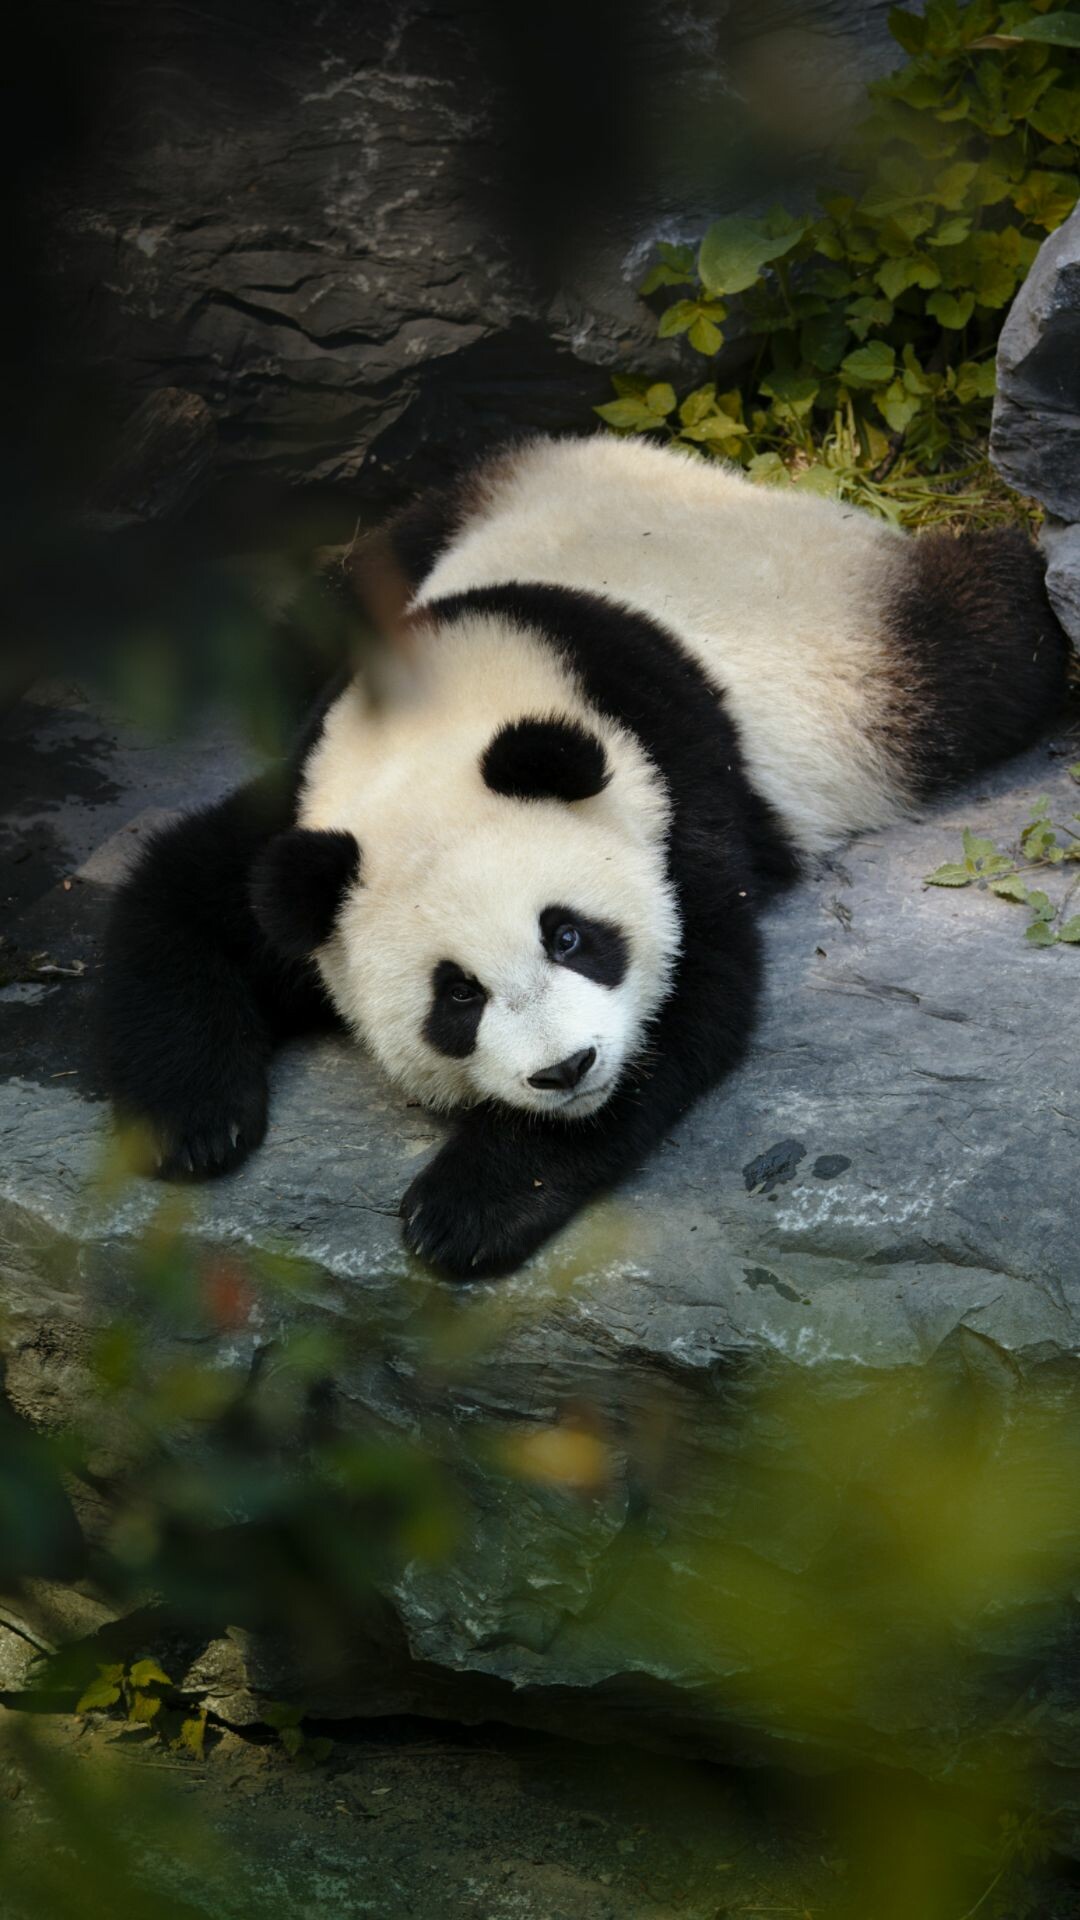 Panda: A large, black and white mammal that lives in forests in China. 1080x1920 Full HD Wallpaper.